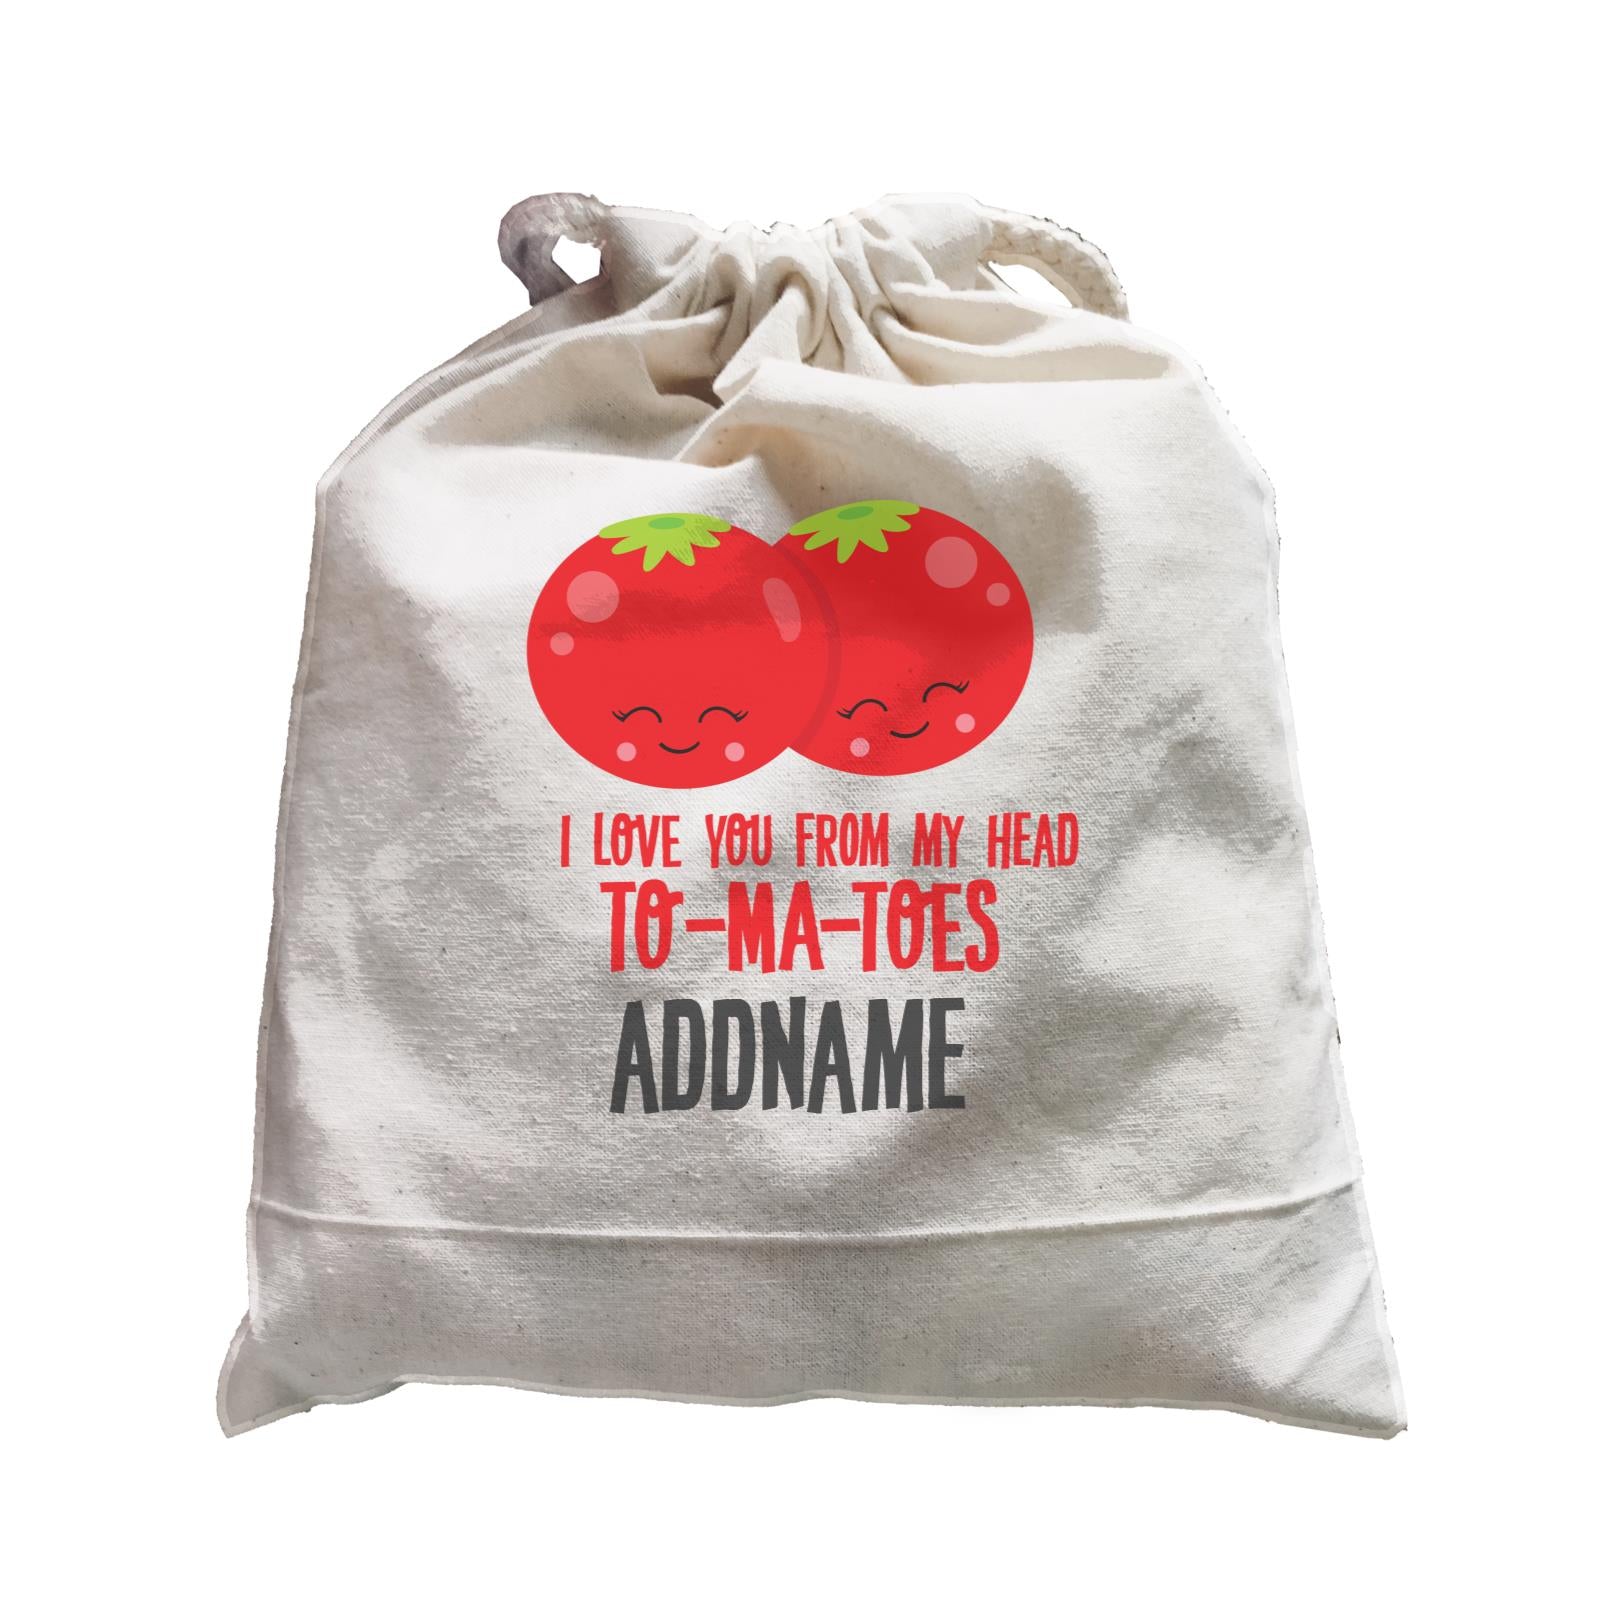 Love Food Puns I Love You From My Head TOMATOES Addname Satchel